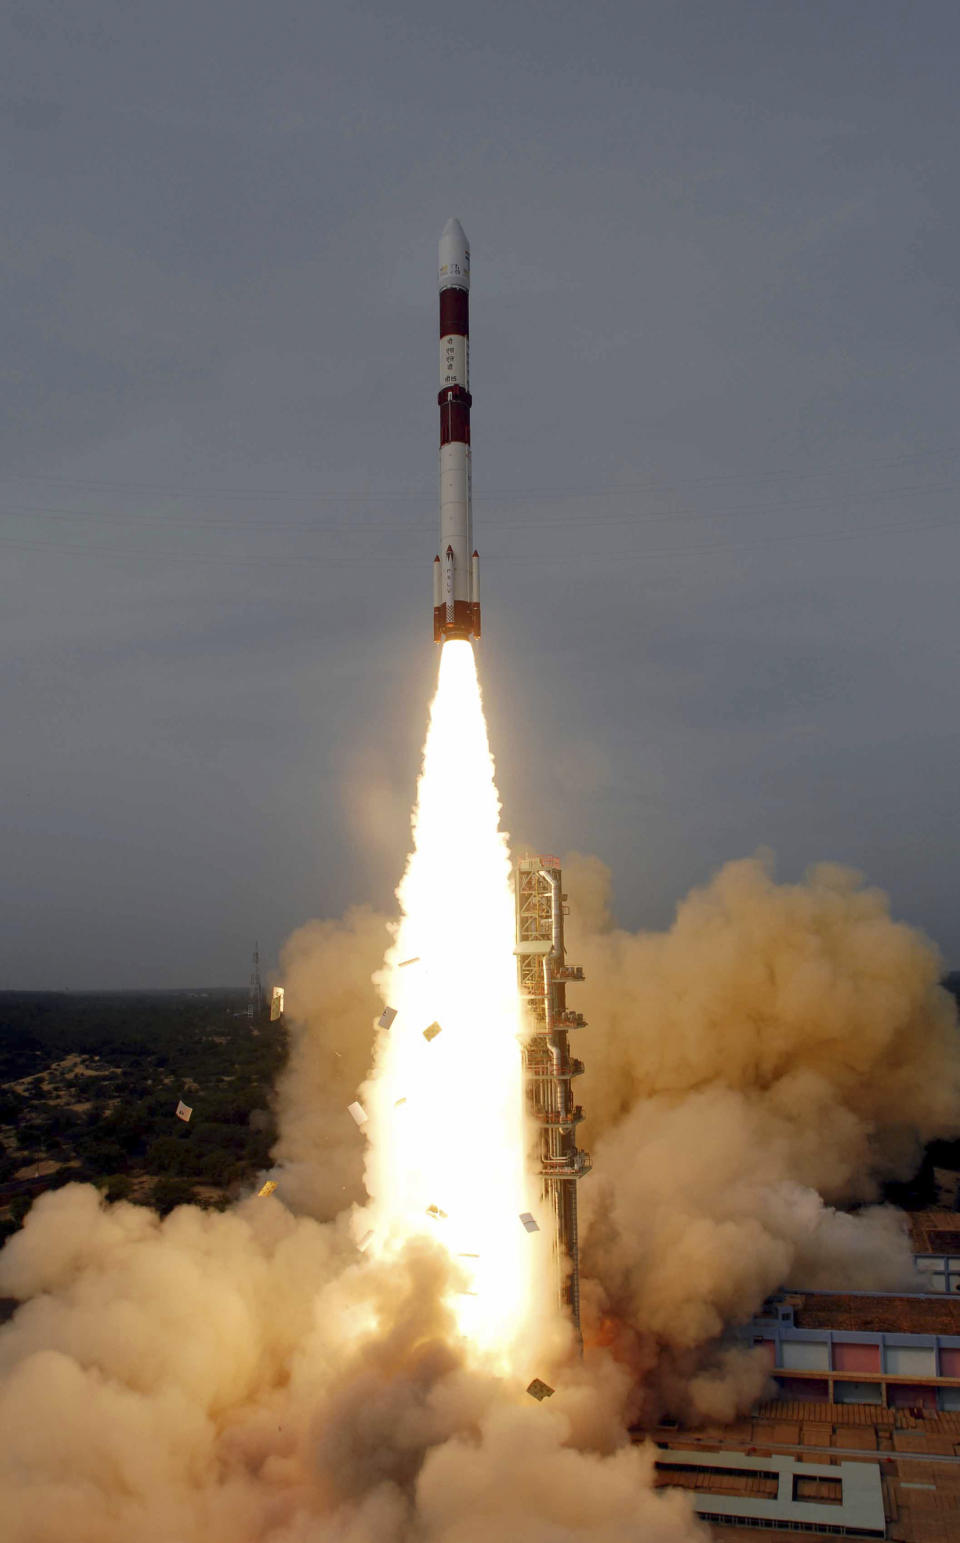 FILE - In this Monday, July 12, 2010 file photo released by Indian Space Research Organization (ISRO), India's Polar Satellite Launch Vehicle (PSLV) blasts off from the Sriharikota spaceport near Chennai, India. Prime Minister Manmohan Singh during a speech Wednesday, Aug. 15, 2012 to mark the 65th anniversary of India's independence from British rule, said Indian science and technology will take a giant leap forward under a plan to send a space mission to Mars next year. Singh says his Cabinet has approved a mission that will collect important scientific information about the red planet. (AP Photo/Indian Space Research Organization, File)